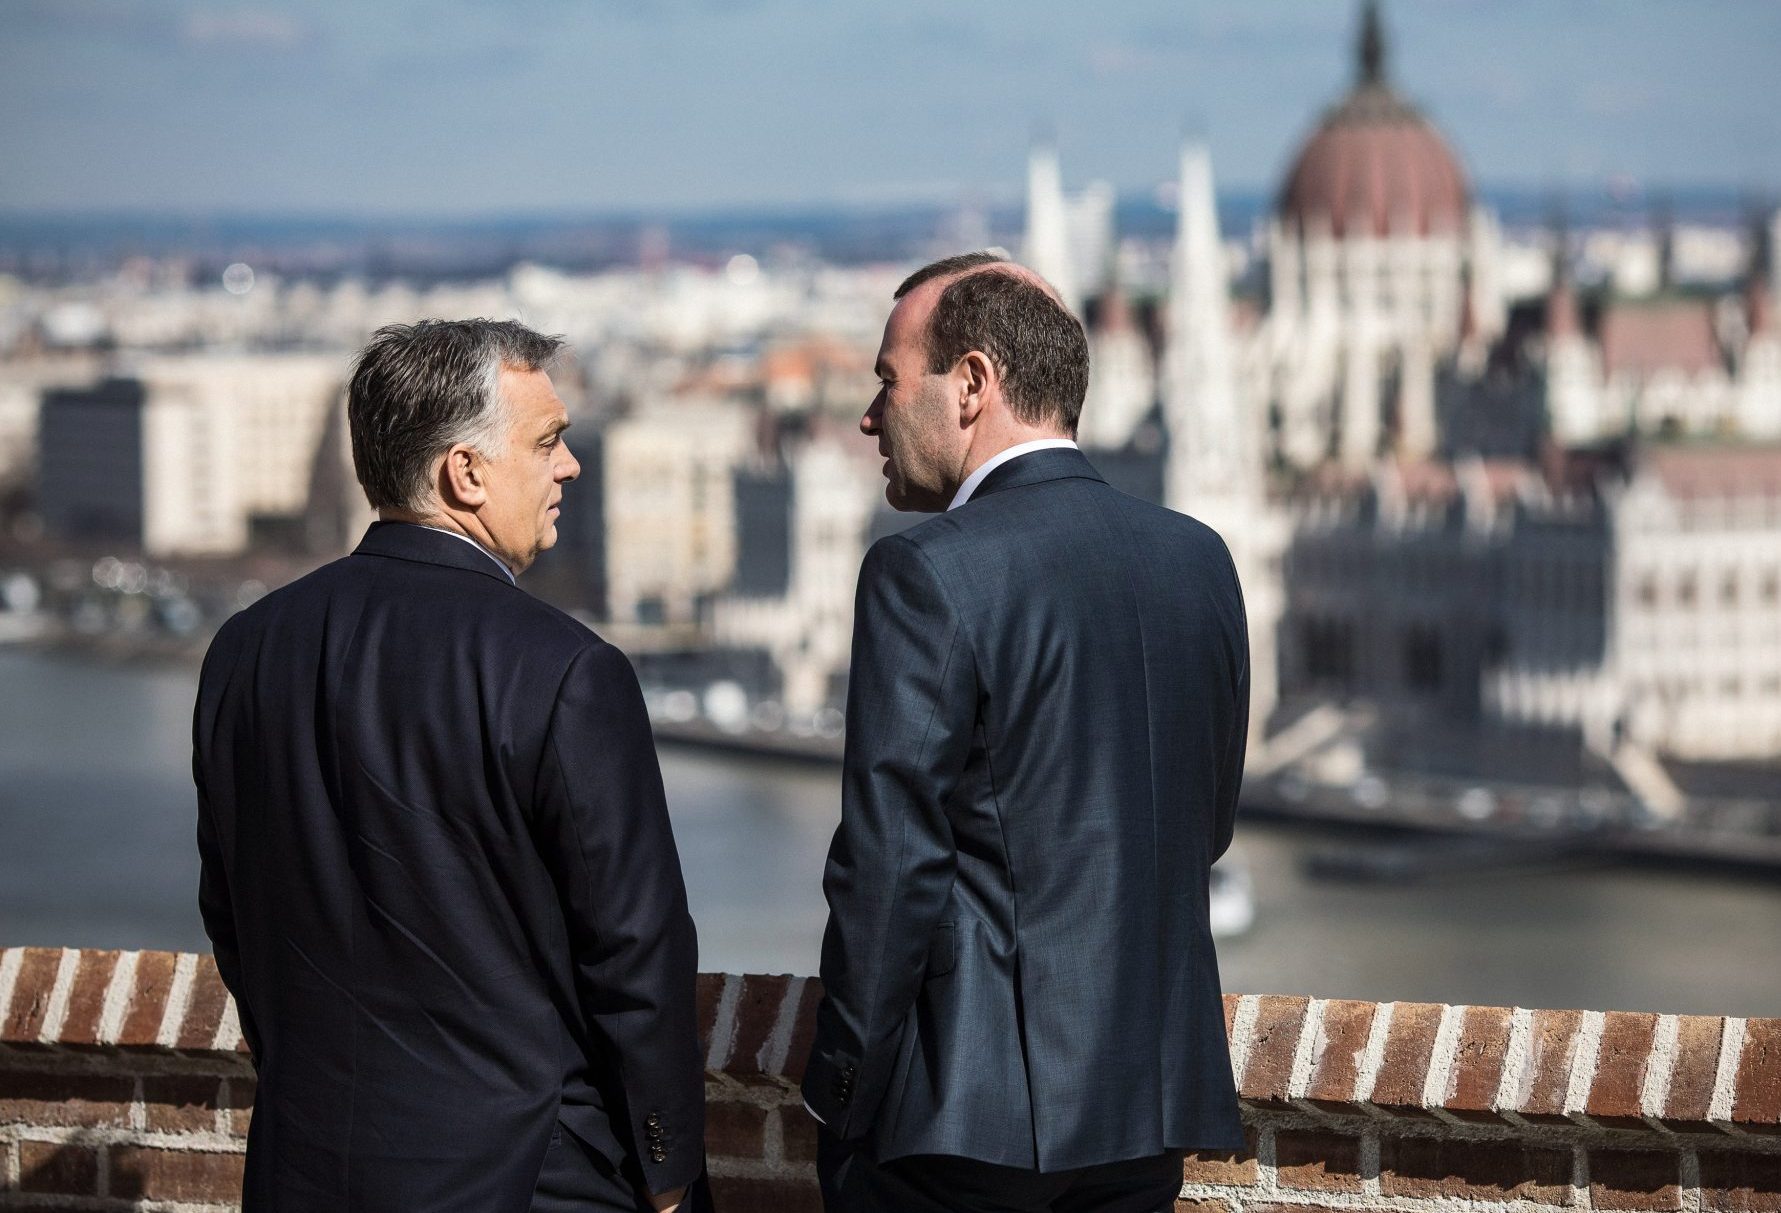 Orbán Proposes Loosening Ties between Fidesz and the EPP